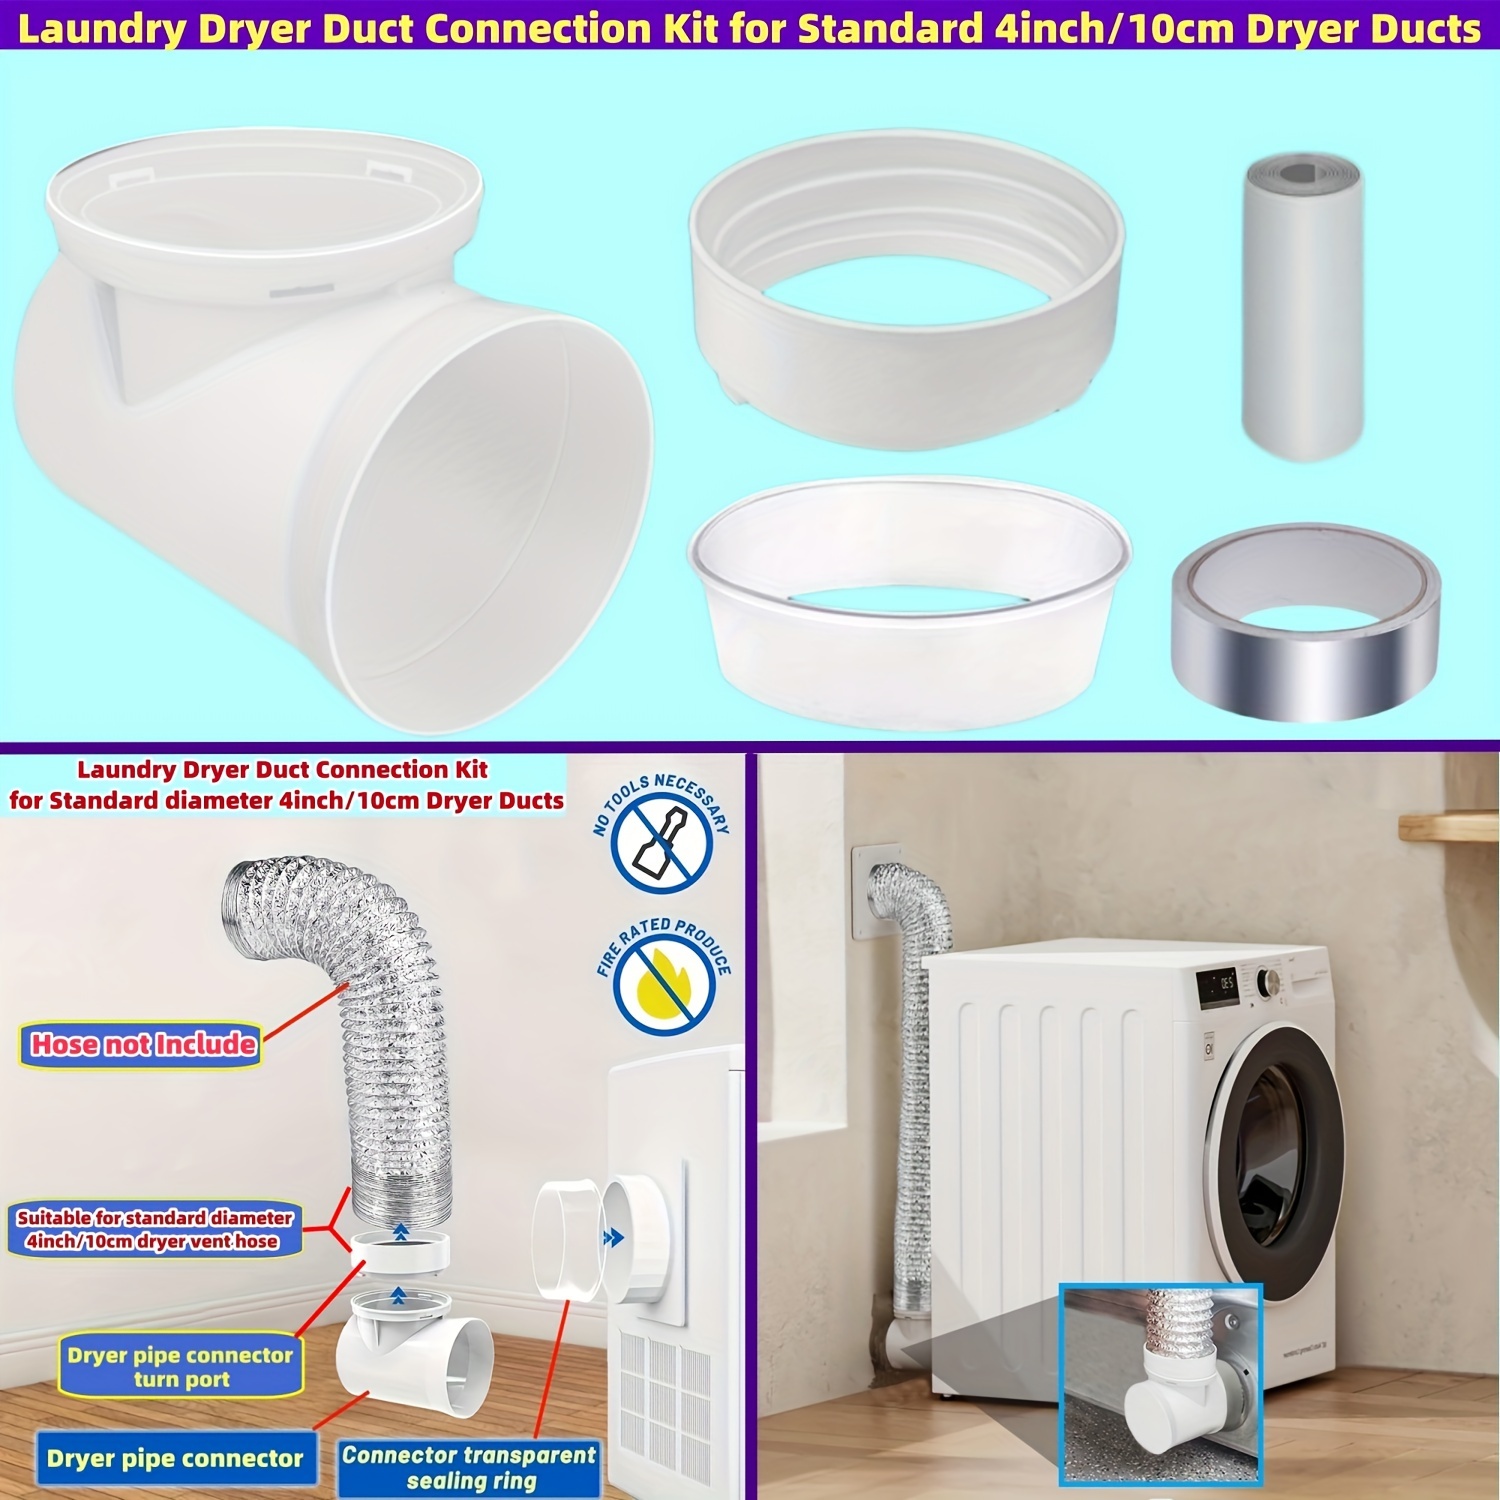 

Laundry Dryer Duct Connection Kit, Suitable For Standard 4inch Dryerducts, Indoor Hook-up Dryer Vent Kit With Fixed Bracket Andstv-90 Dryer Duct Connector Kit